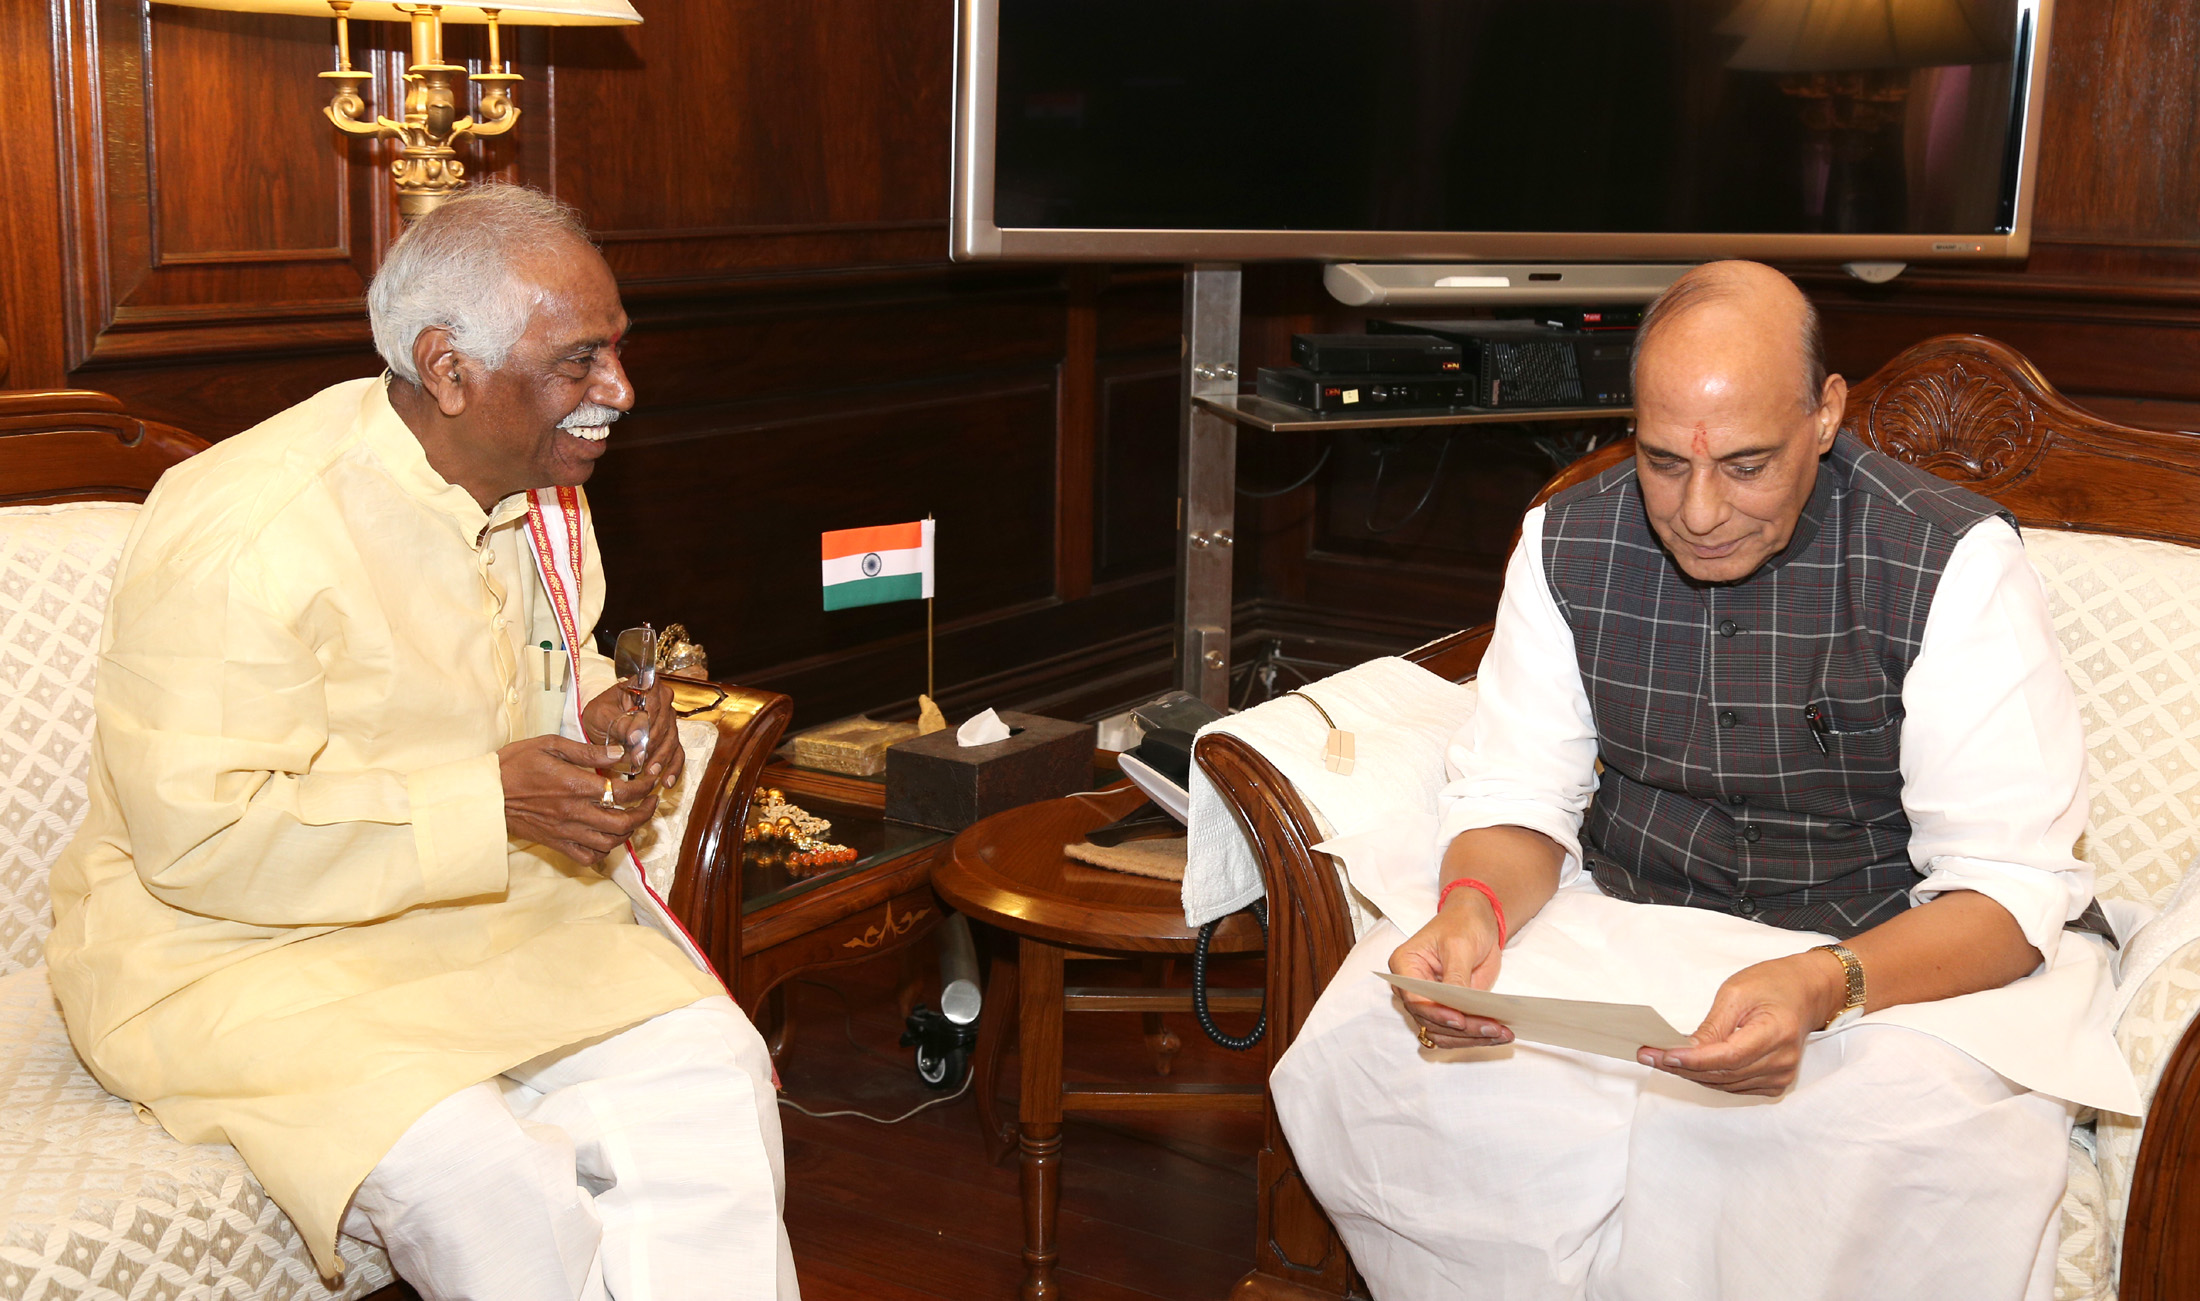 The Minister of State for Labour and Employment (Independent Charge), Shri Bandaru Dattatreya calling on the Union Home Minister, Shri Rajnath Singh, in New Delhi on November 01, 2016.